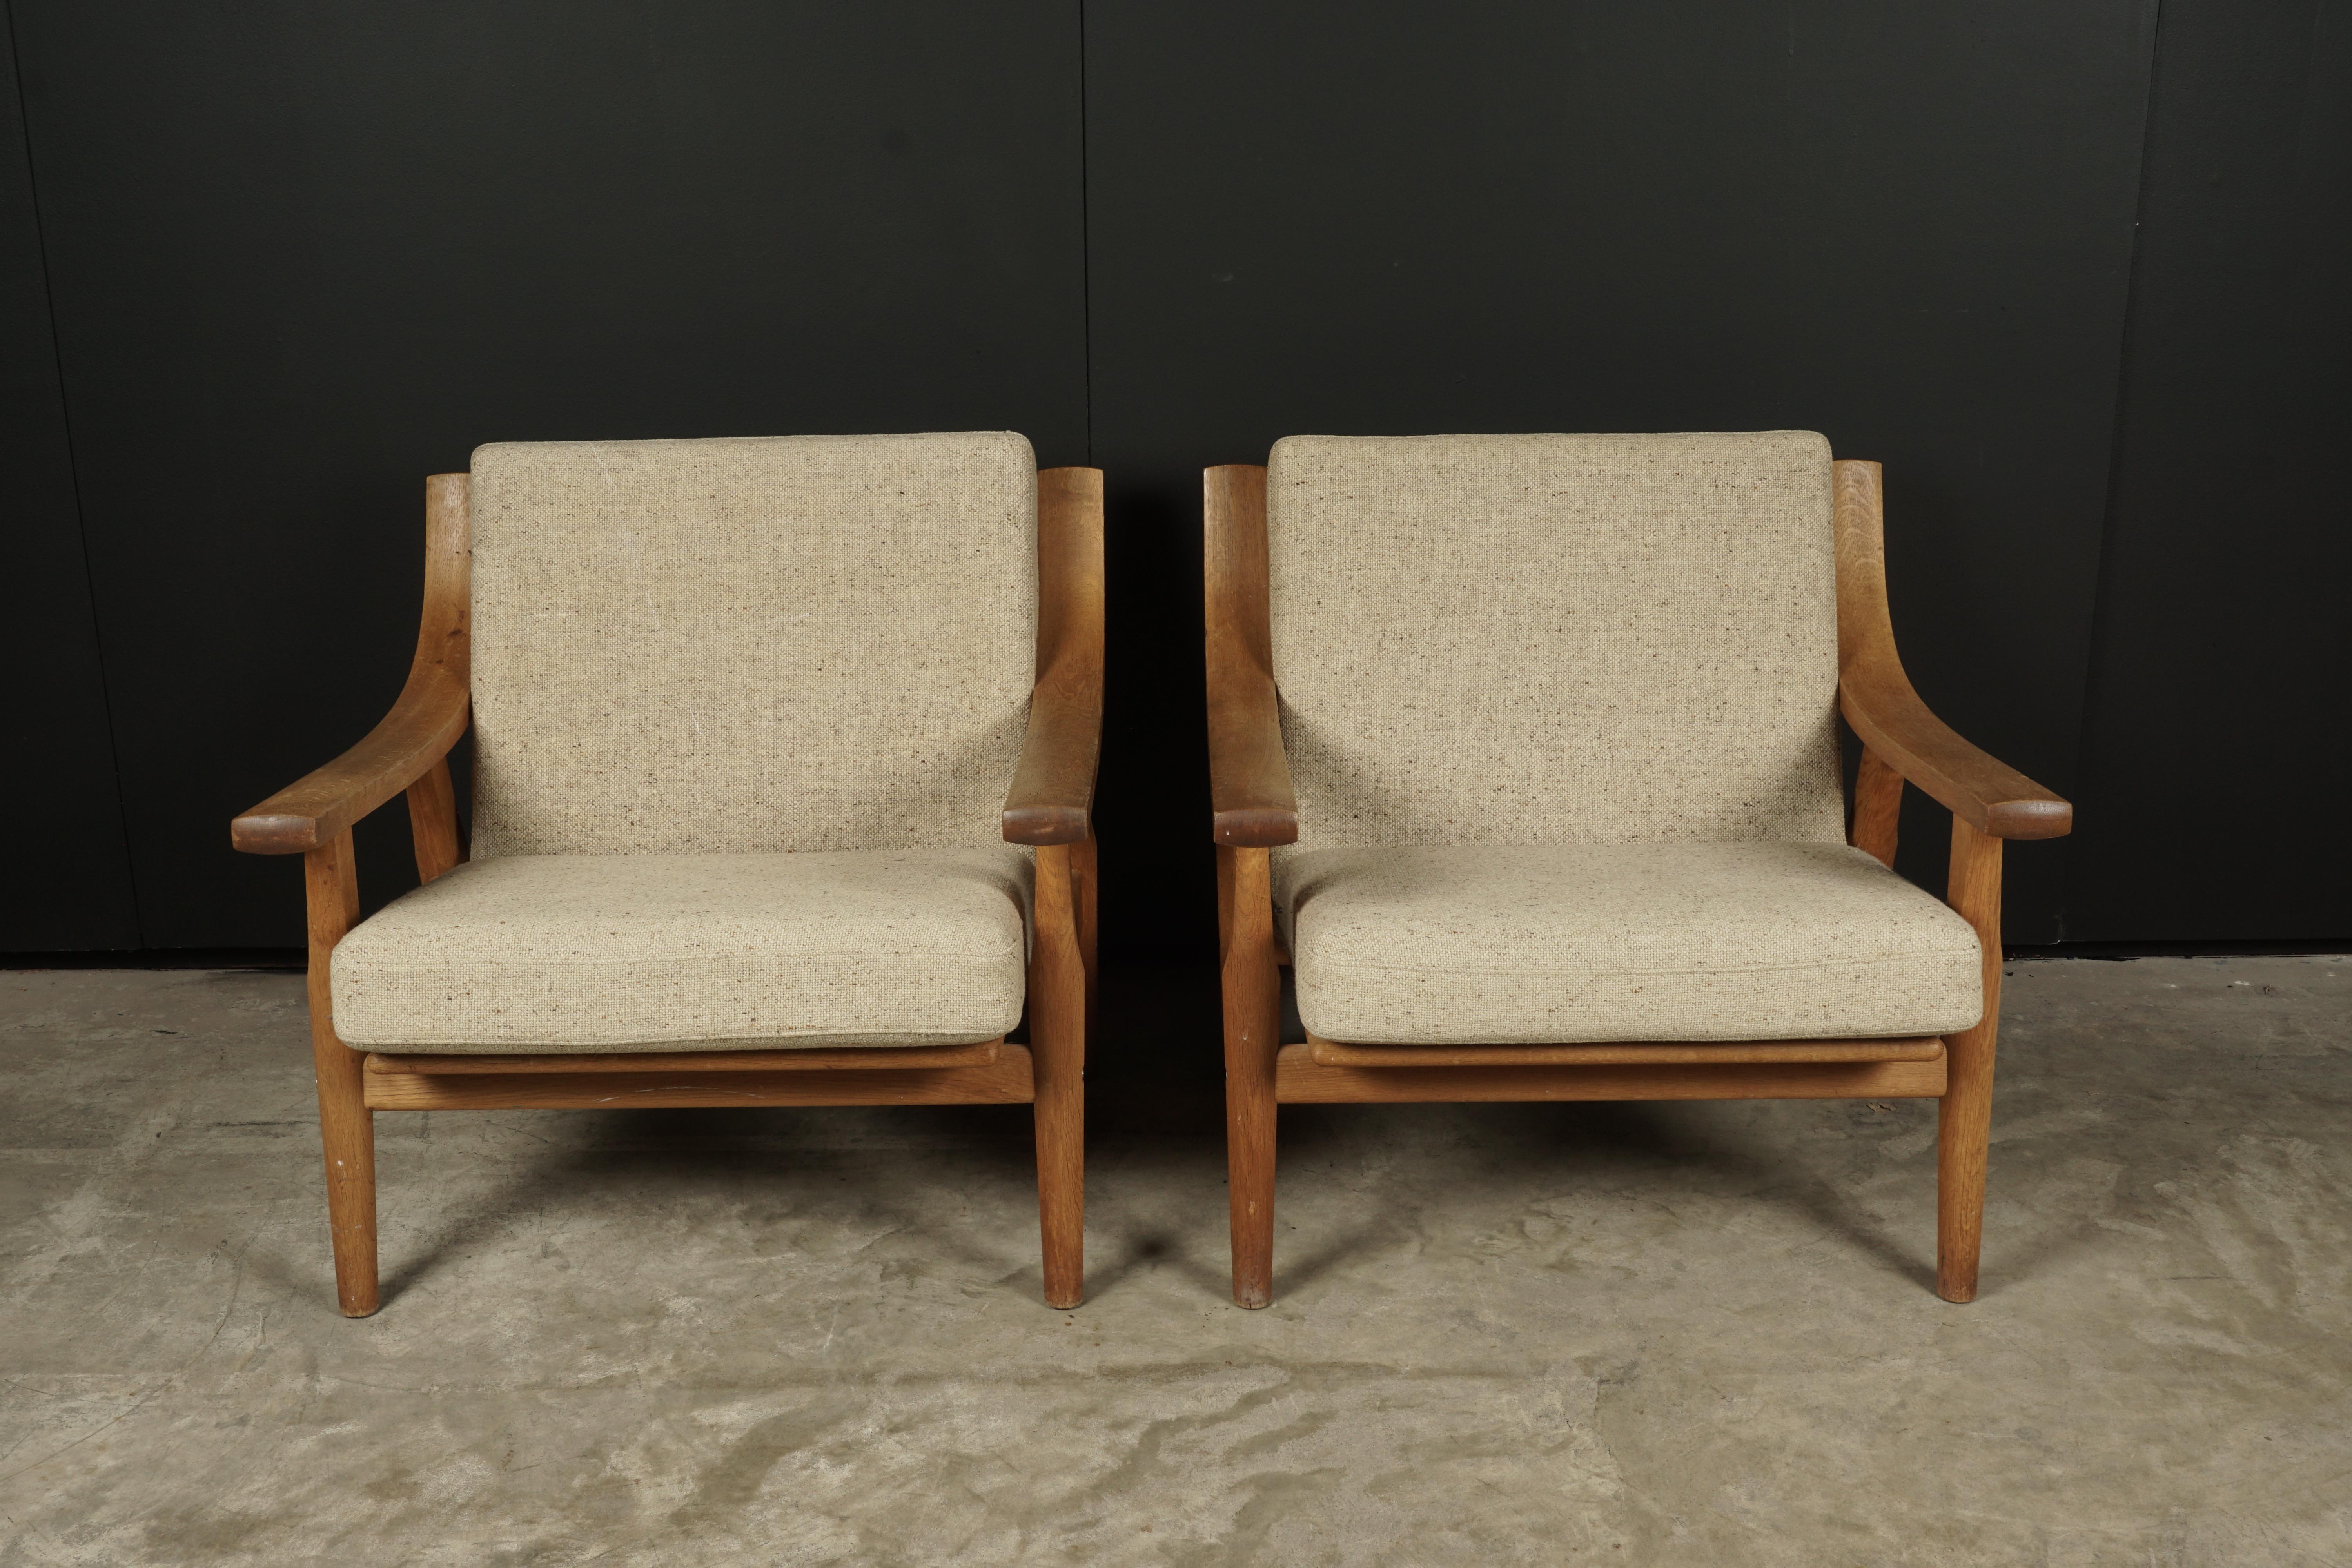 Vintage pair of Hans Wegner lounge chairs, Model GE-530, from Denmark, circa 1960. Solid oak frame with original upholstery.